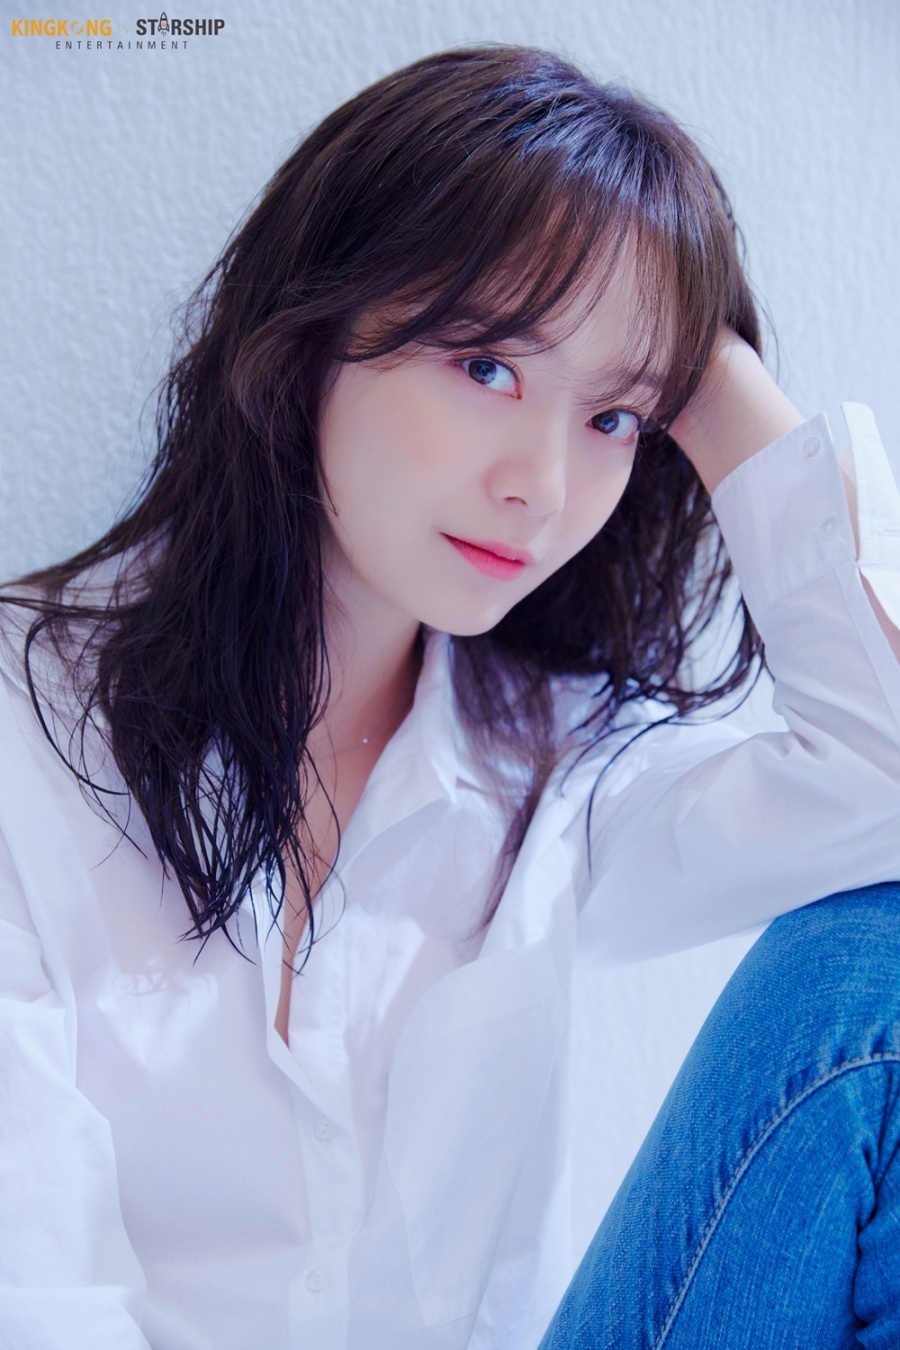 Actor Jeon So-min has released a new profile.On the 22nd, King Kong by Starship released a new profile featuring the colorful charm of Actor Jeon So-min.In the open photo, Jeon So-min is staring at the camera wearing a clean white shirt and jeans.He has a clear skin, big eyes, a slightly wet hairstyle, and a refreshing yet pure charm.In the following photos, Jeon So-min captures the attention of a luxurious atmosphere with black and white photographs wearing black neat.He also showed off a lovely visual, matching pastel-toned warm neat and lace skirts.Jeon So-min has been active in crossing the screen with Brown.He not only digested his unique bright and positive characters, but also received a lot of love from the public with his friendly Image through entertainment programs.Meanwhile, Jeon So-min is appearing on SBS Running Man and is reviewing his next film.=